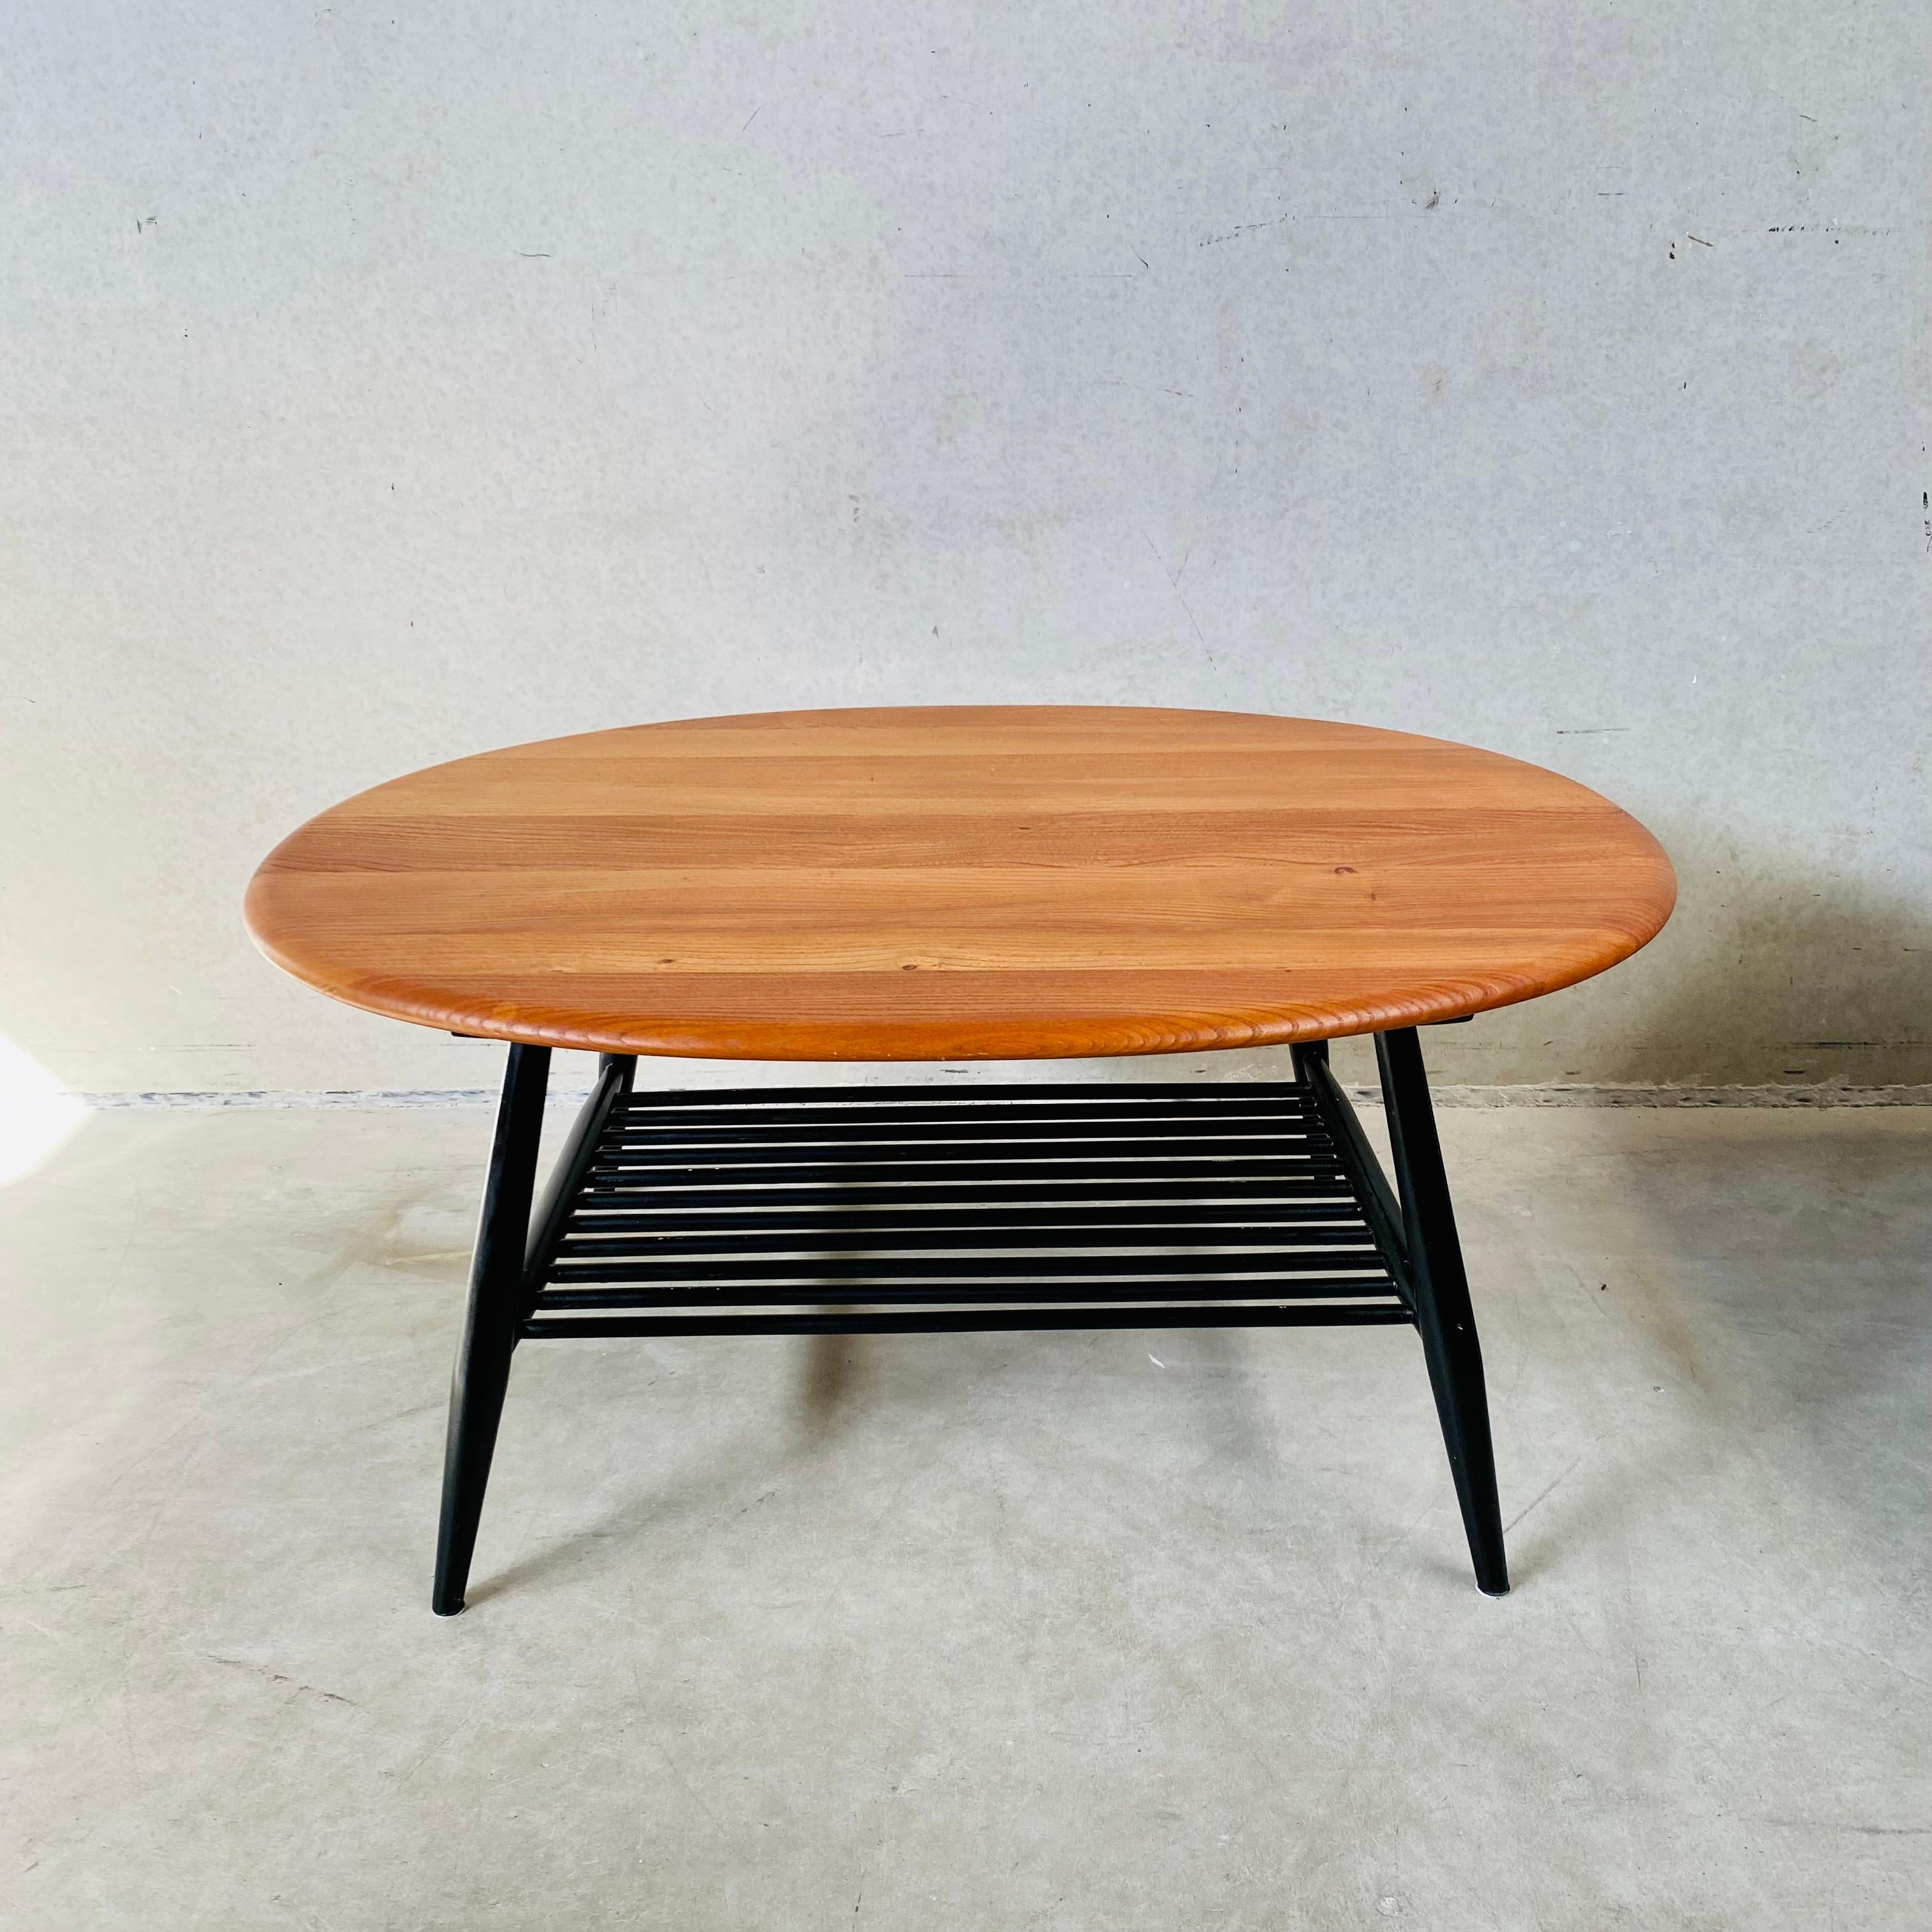 Wood Large Oval Coffee Table by Lucian Ercolani for Ercol, United Kingdom, 1970 For Sale